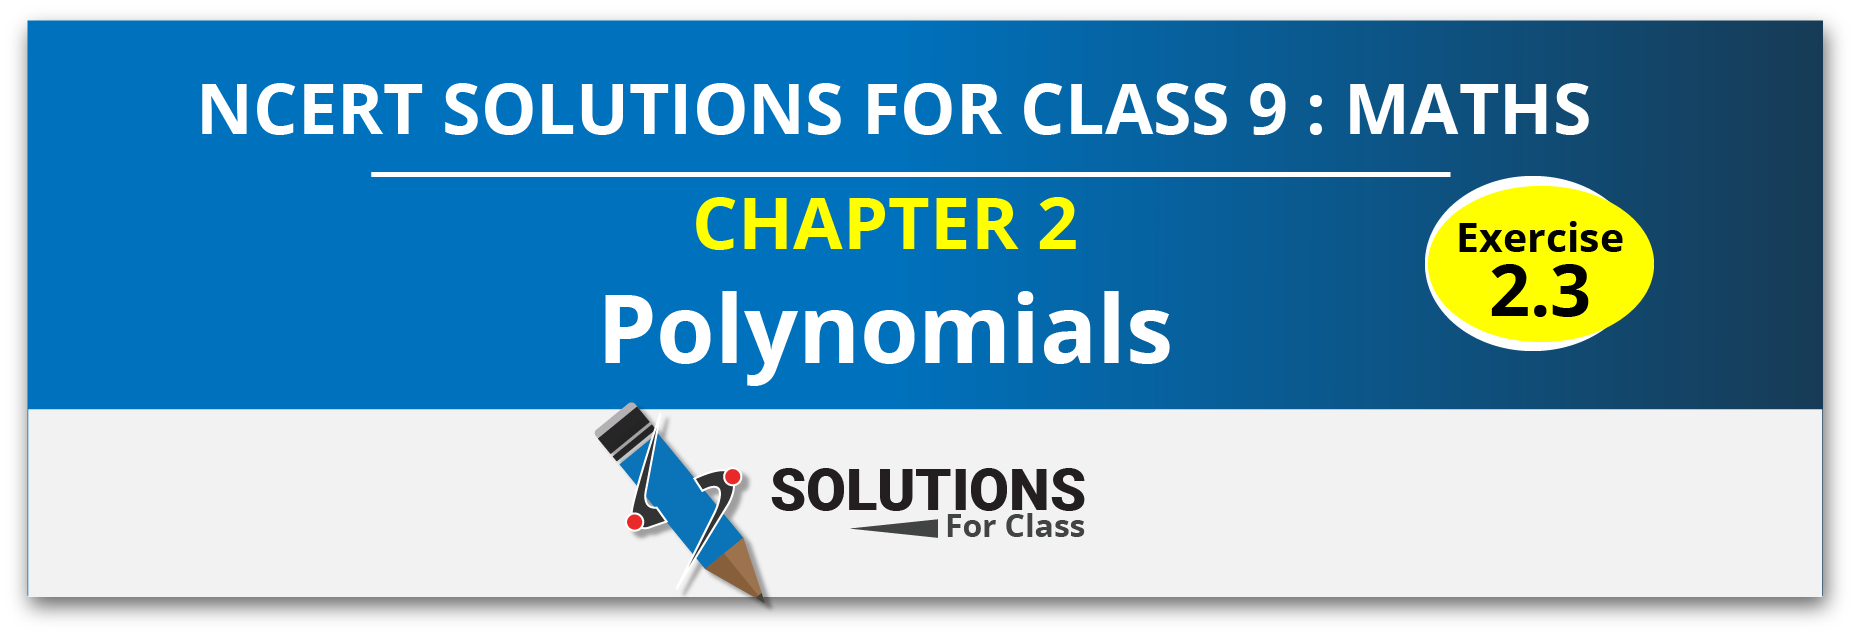 NCERT Solution For Class 9, Maths, Chapter 2, Polynomials, Exercise 2.3